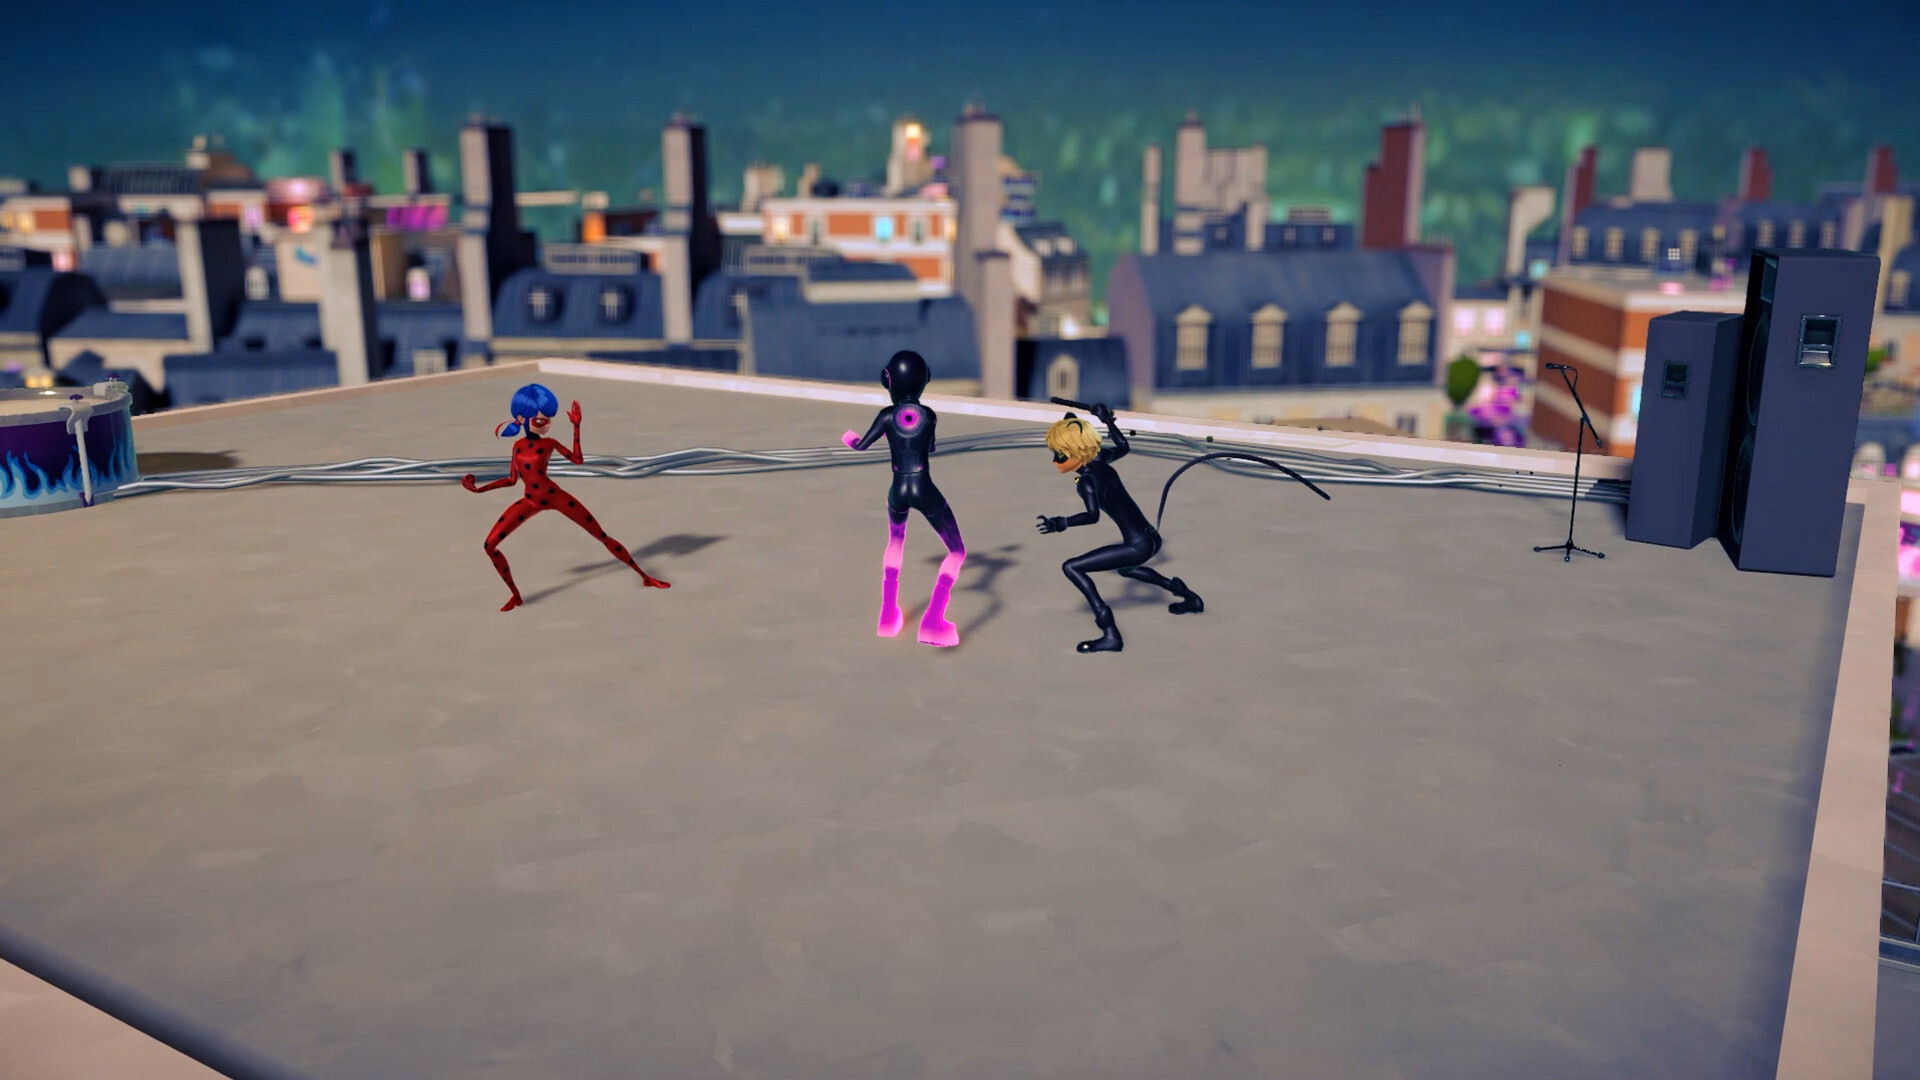 Miraculous: Rise of the Sphinx - screenshot 6